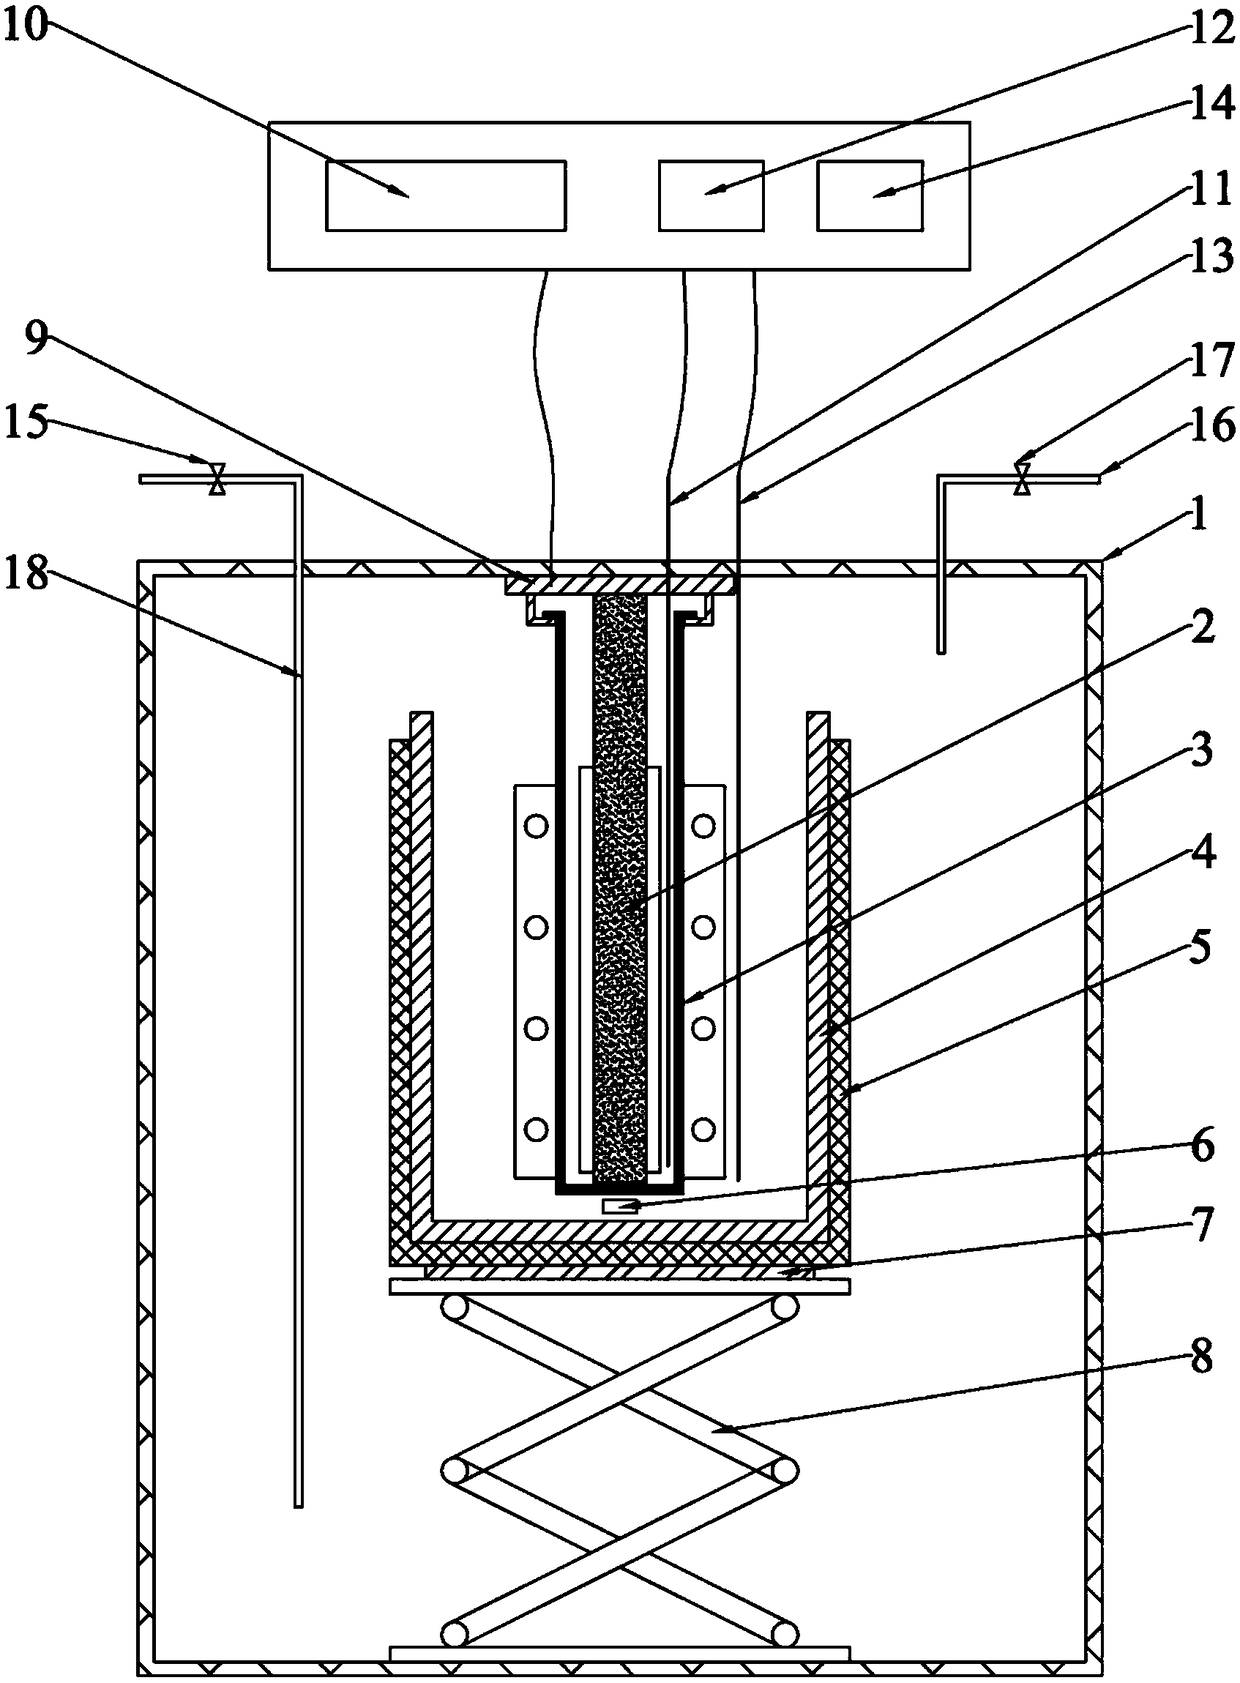 A device and method for measuring the coking tendency of solid-containing heavy raw materials when heated